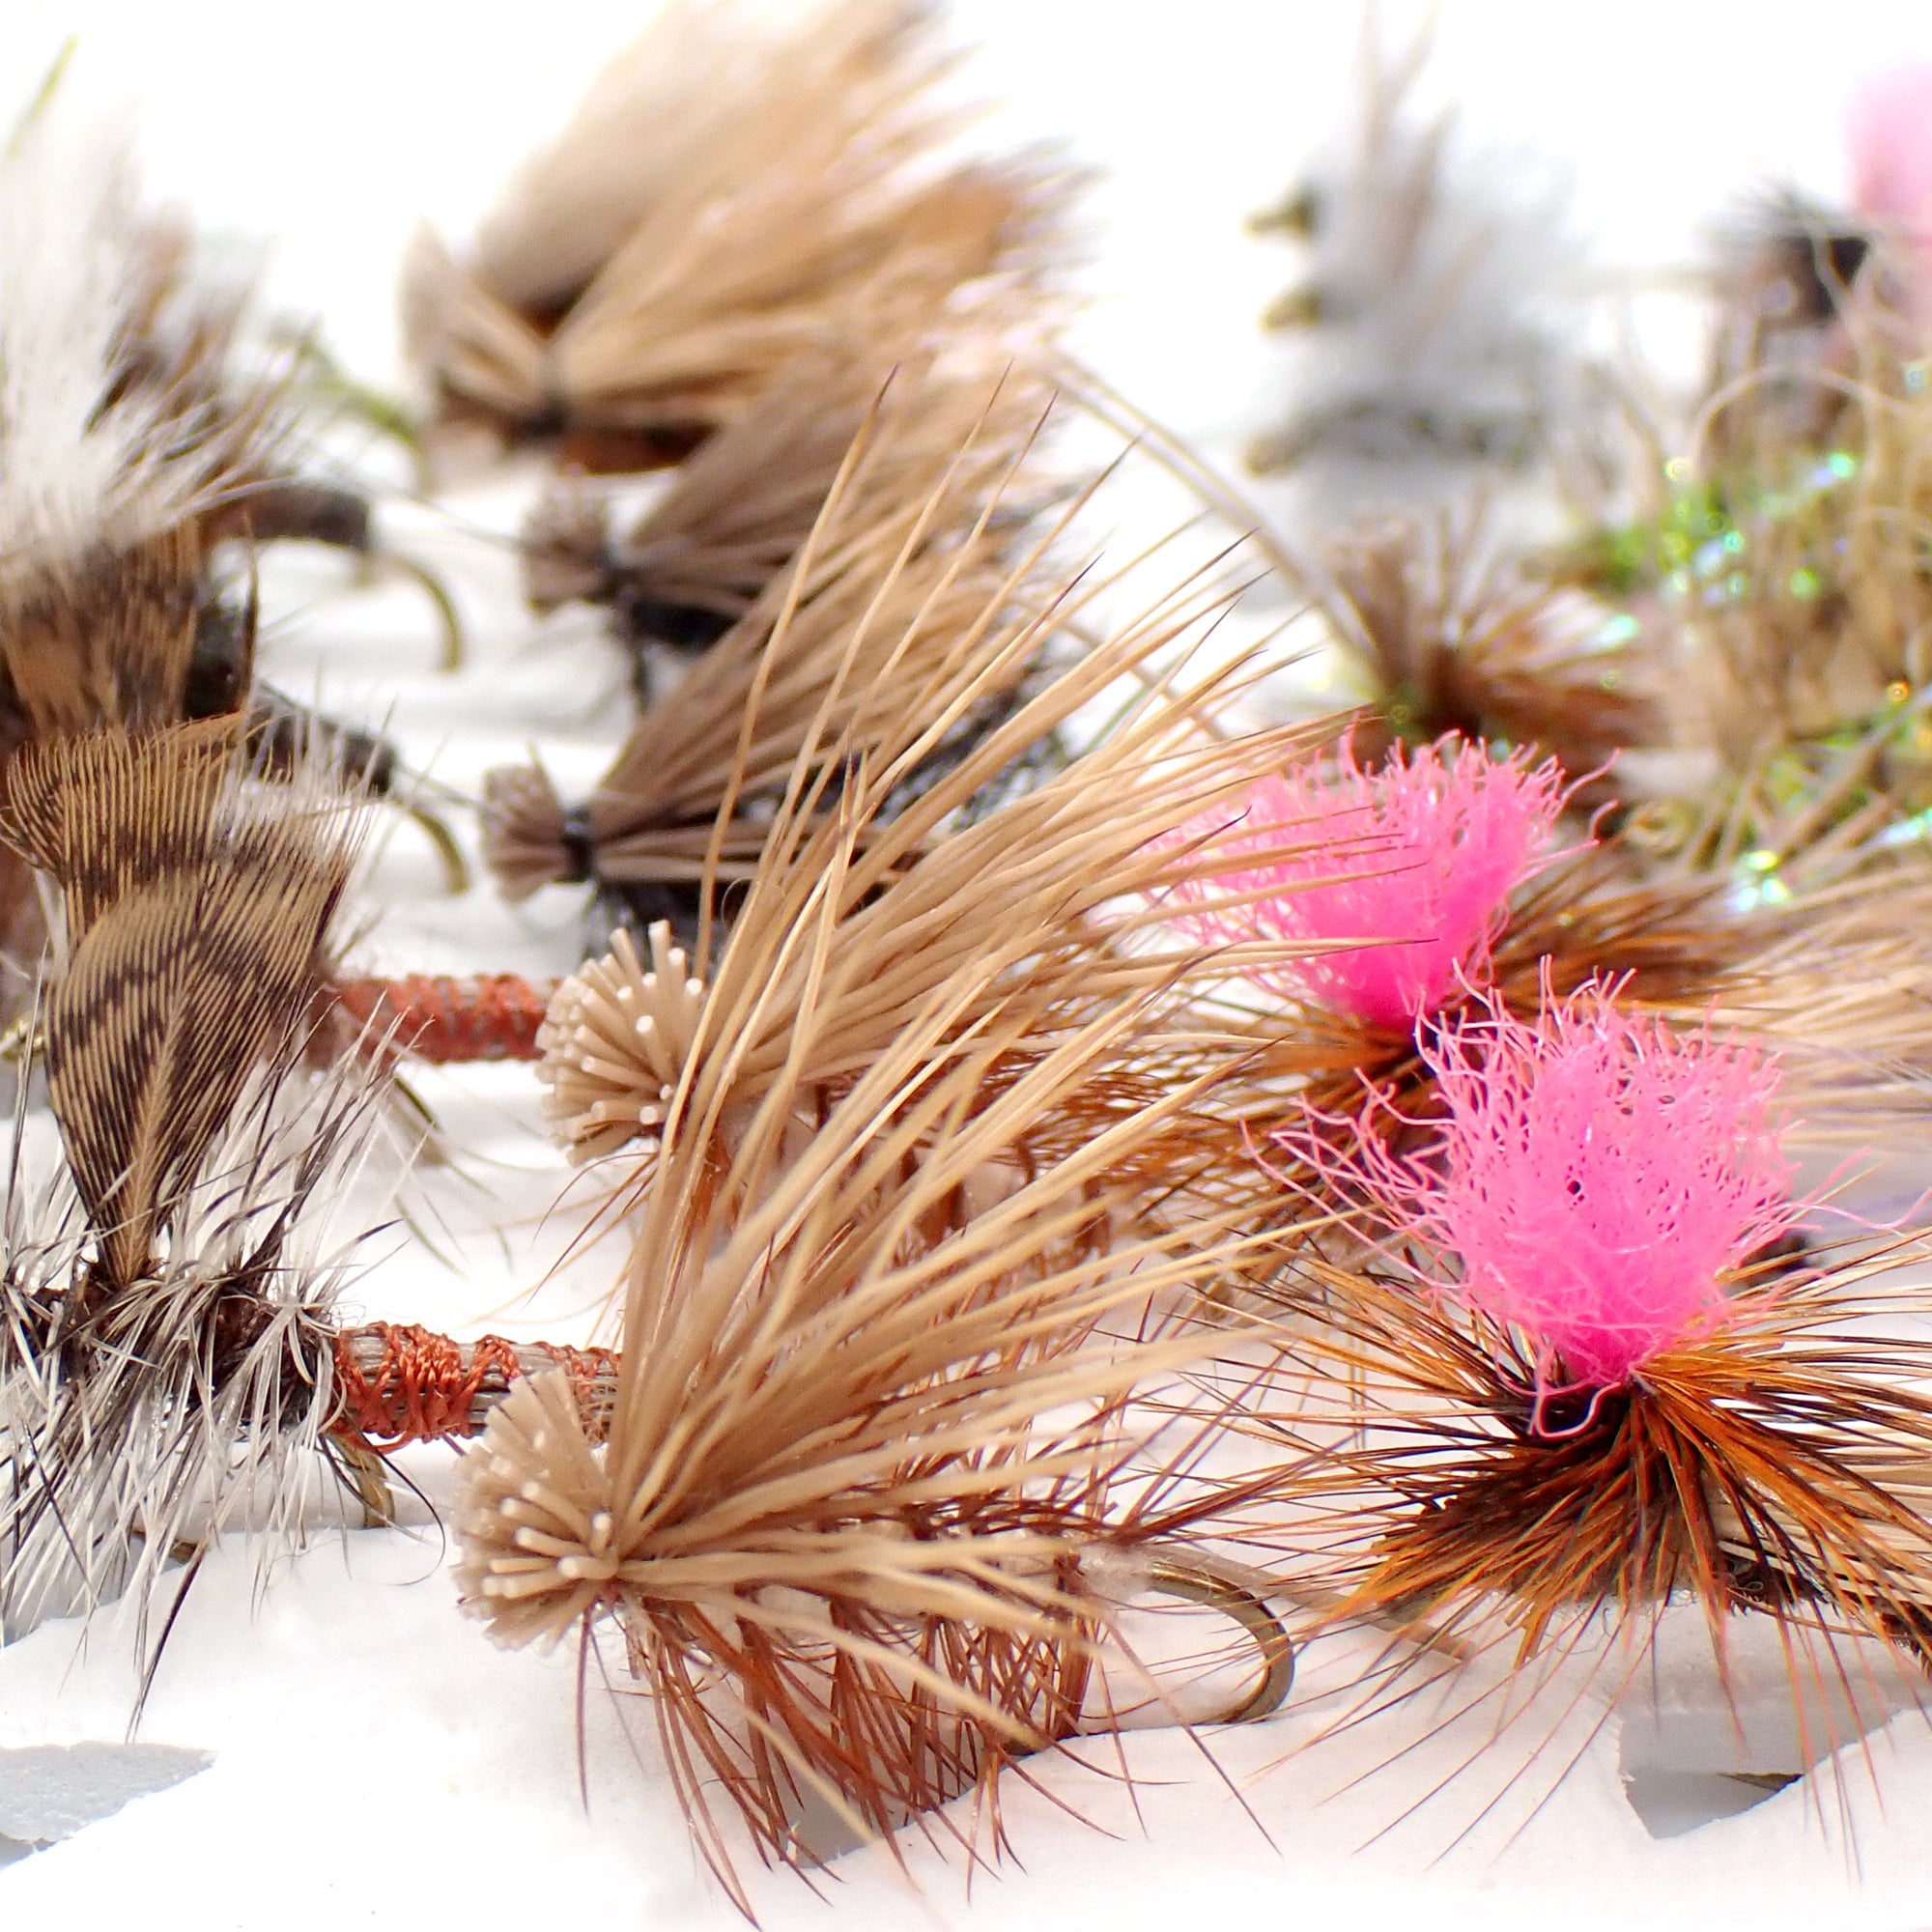 Trout Flies Assortment Fly Fishing Flies Hand Tied Flies for Fishing Trout  Fathers Day Gifts for Men Fly Fishing Gifts -  Canada